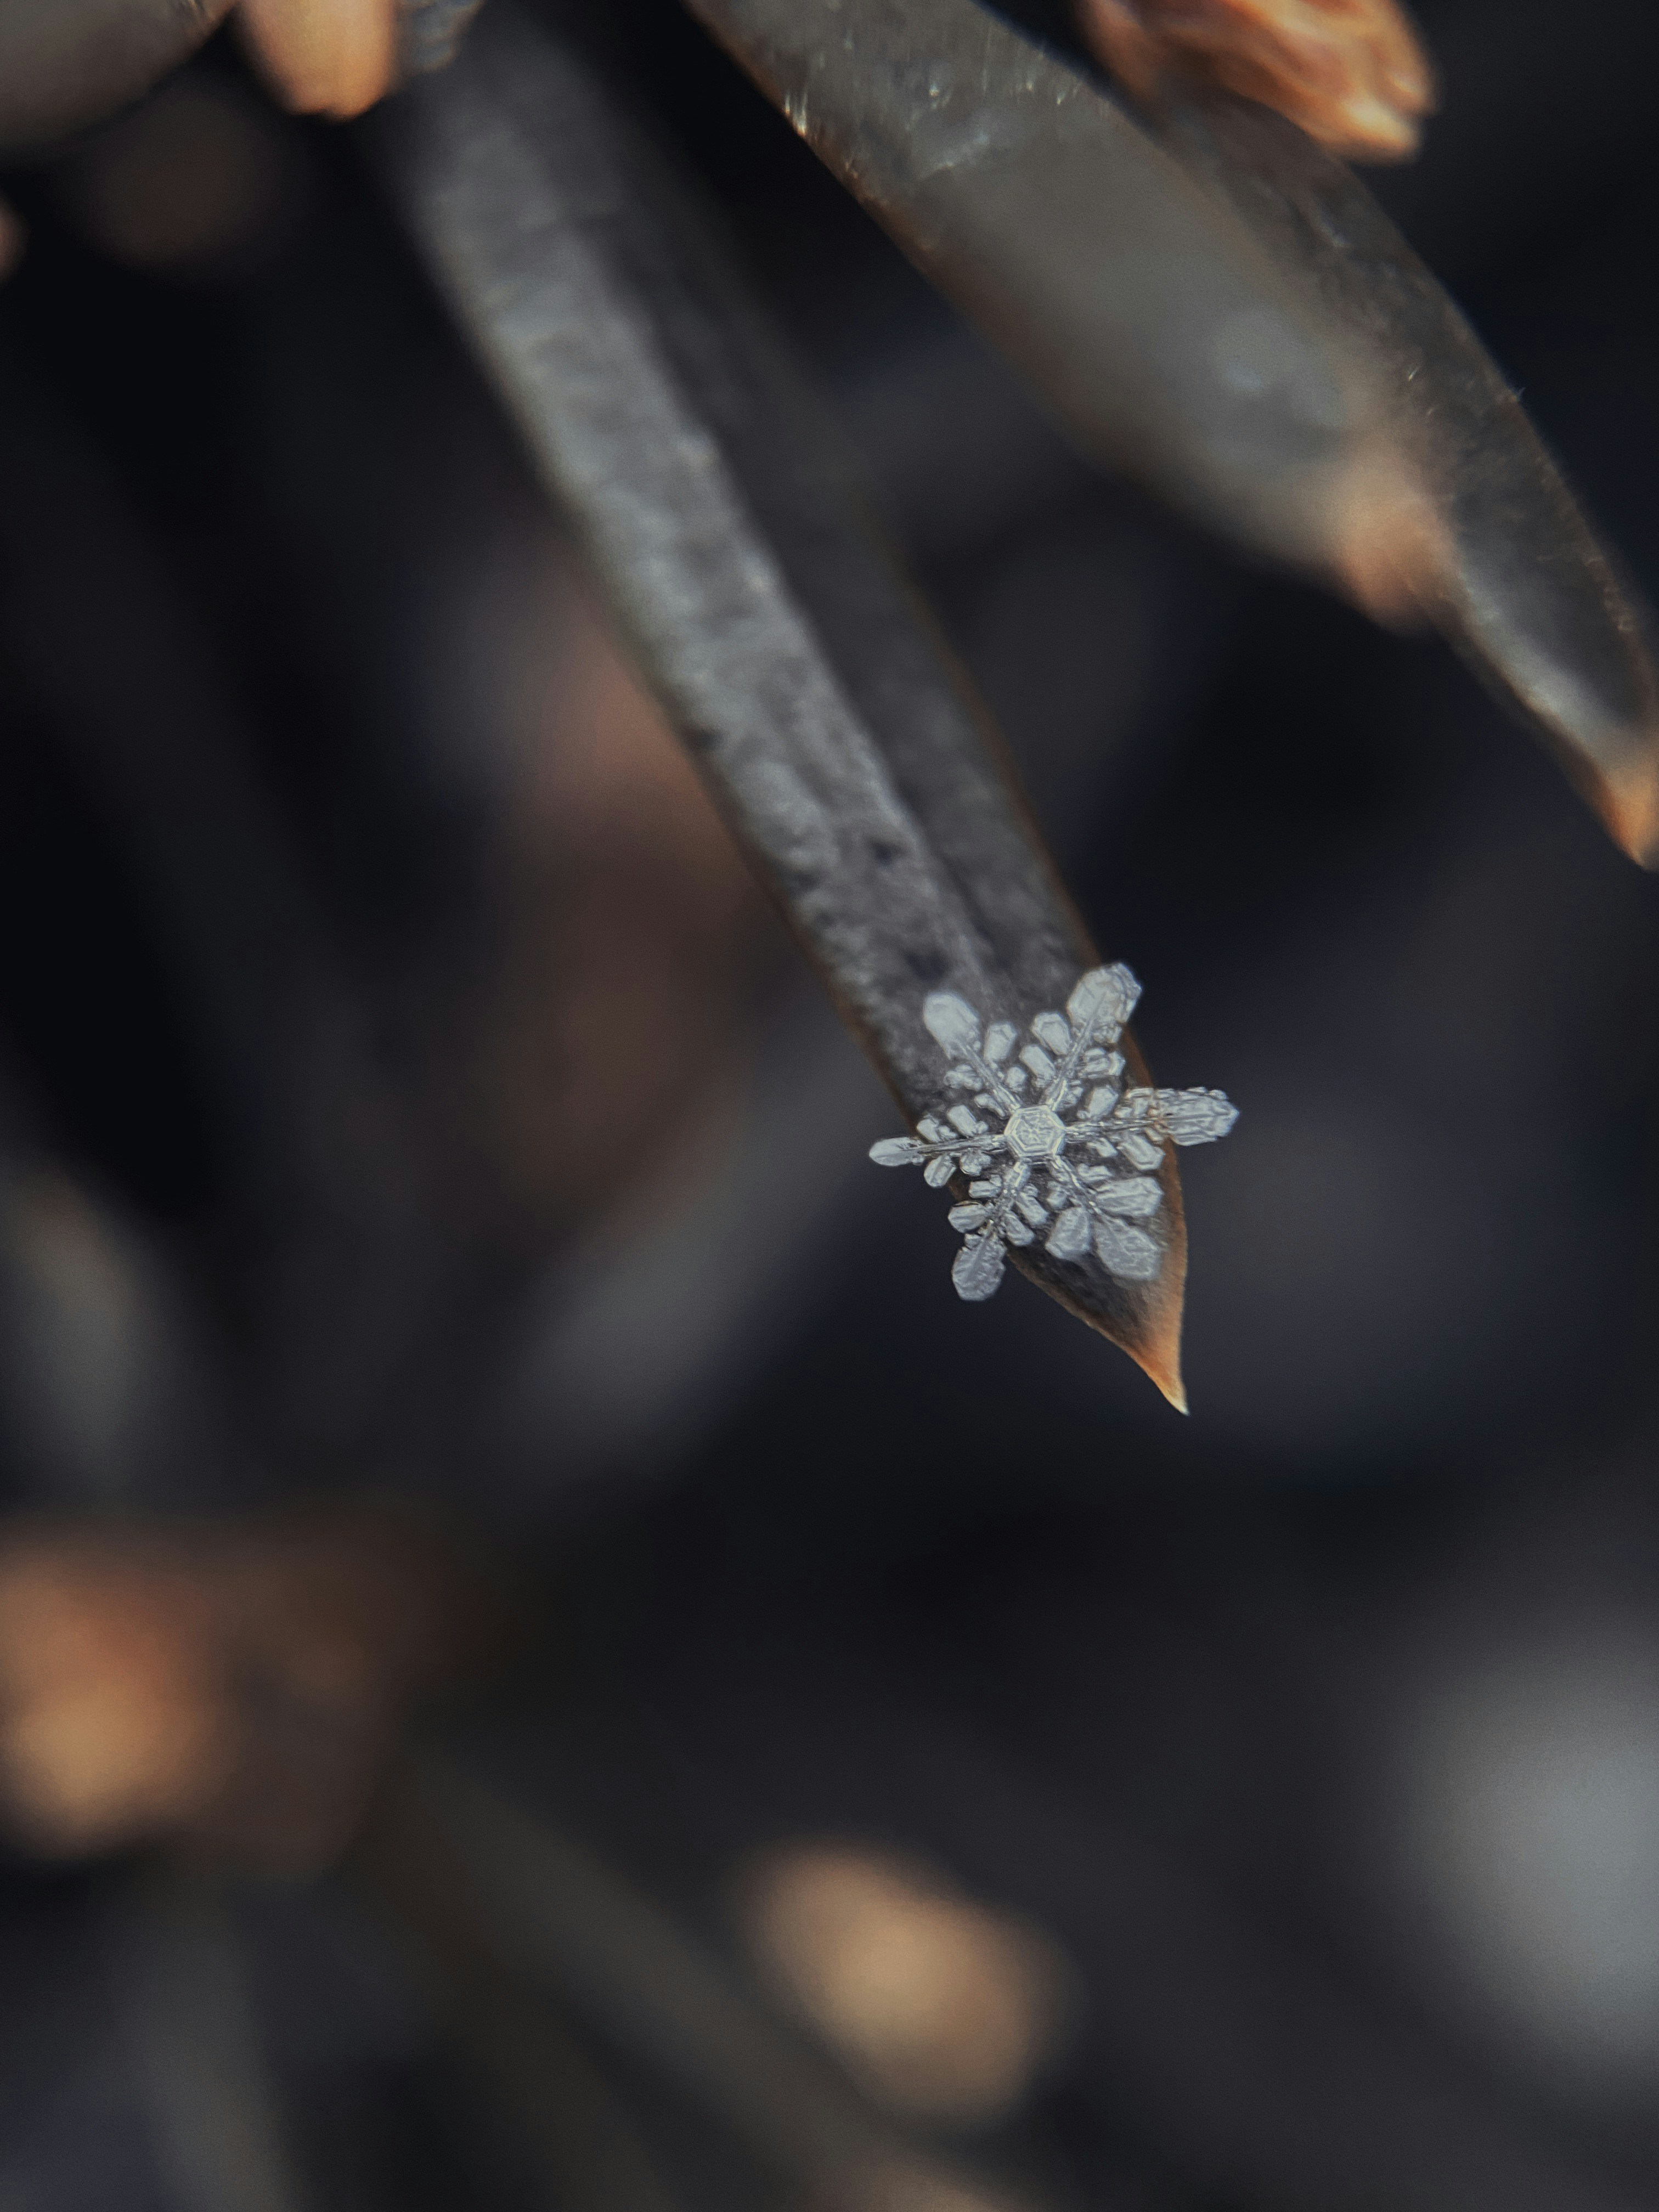 Choose from a curated selection of snowflake photos. Always free on Unsplash.